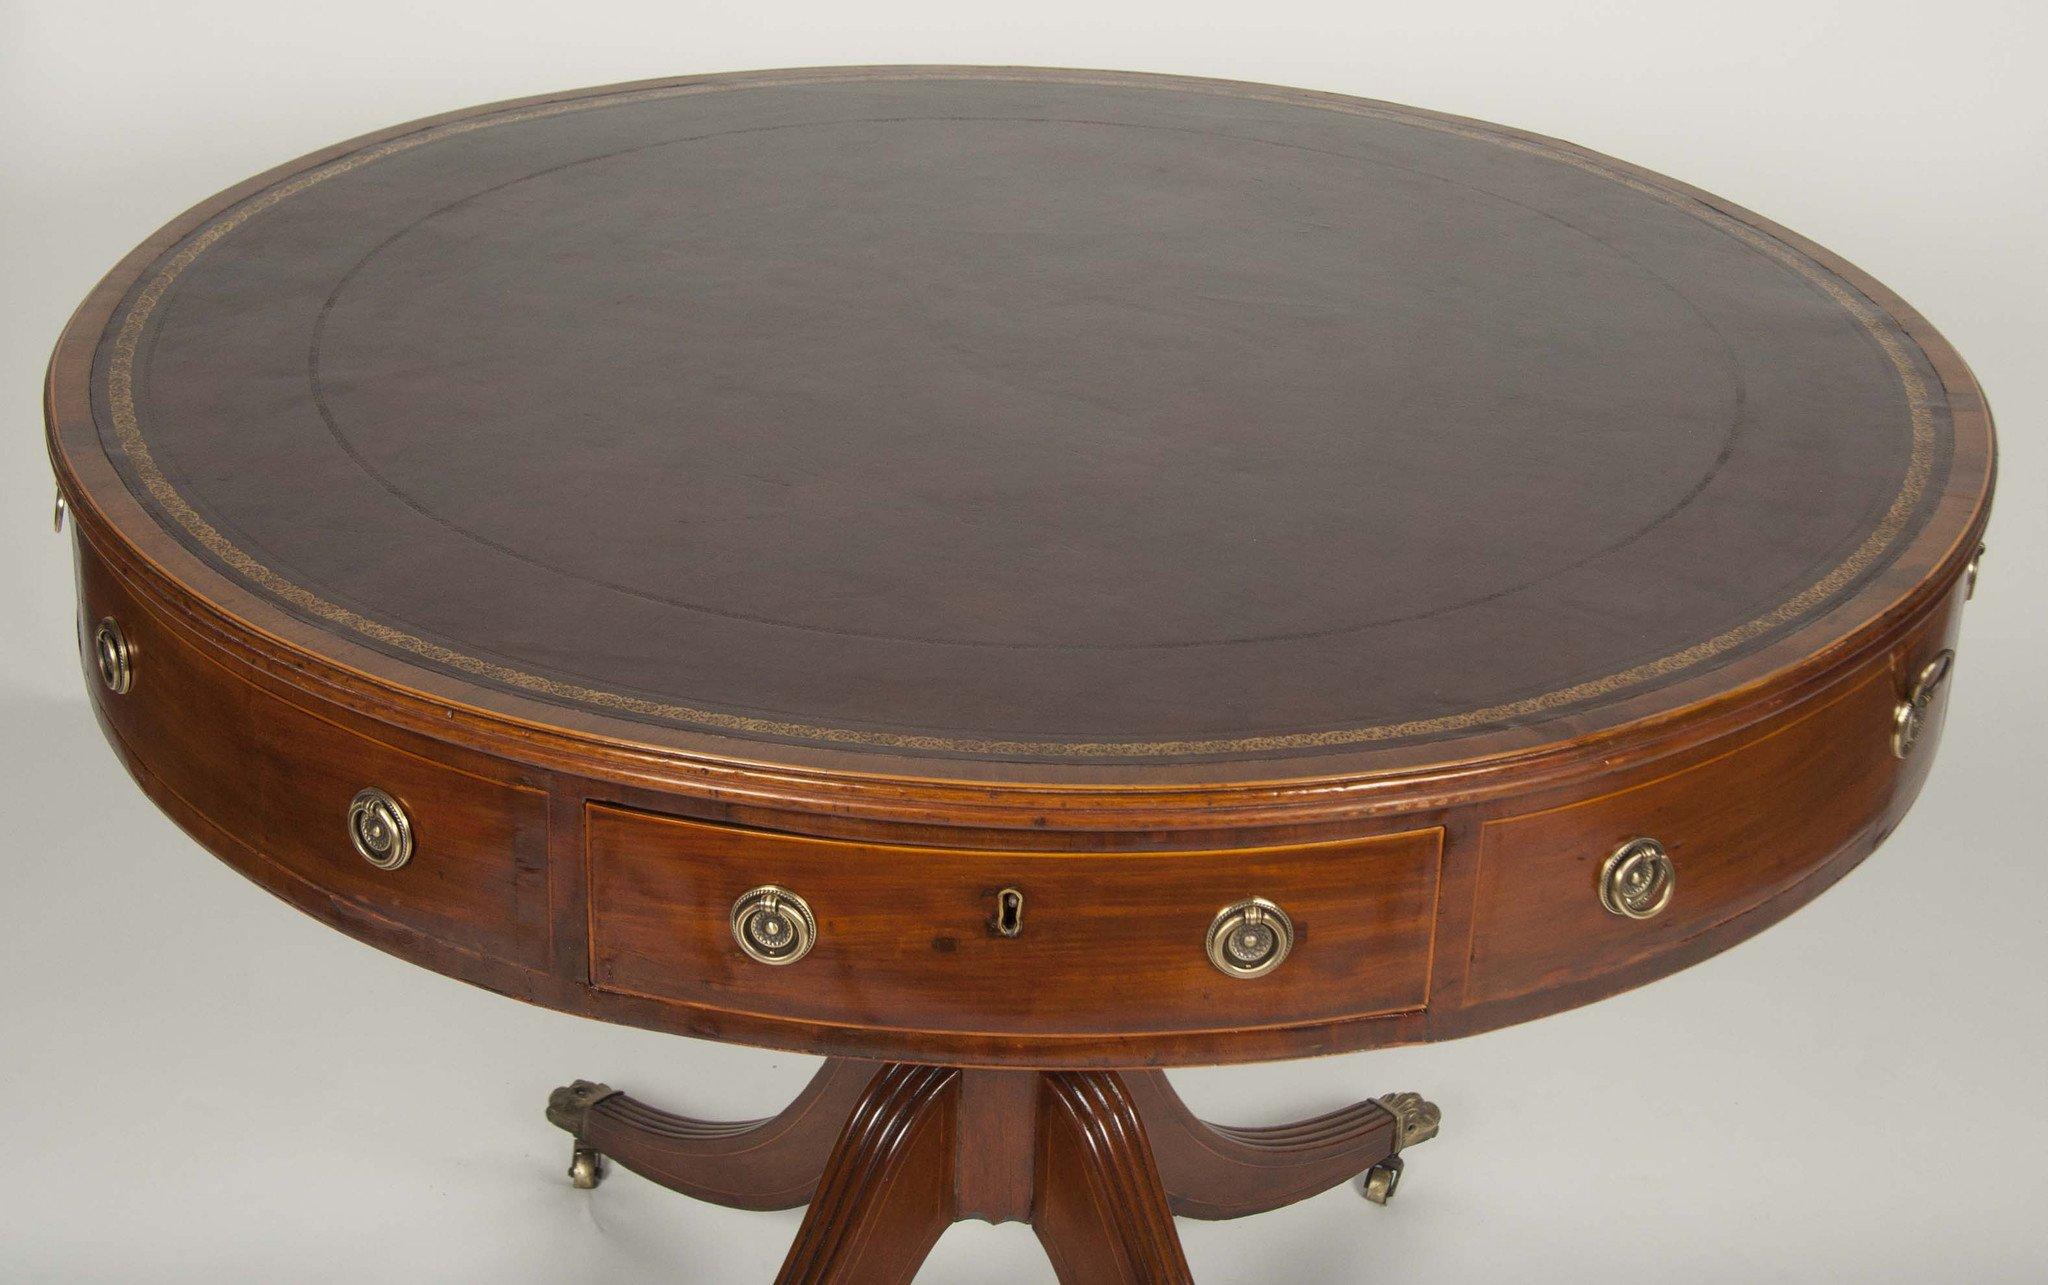 An English Regency mahogany revolving drum table with leather top, pencil inlays, four drawers, and raised on pedestal base with sabre legs on paw foot casters.